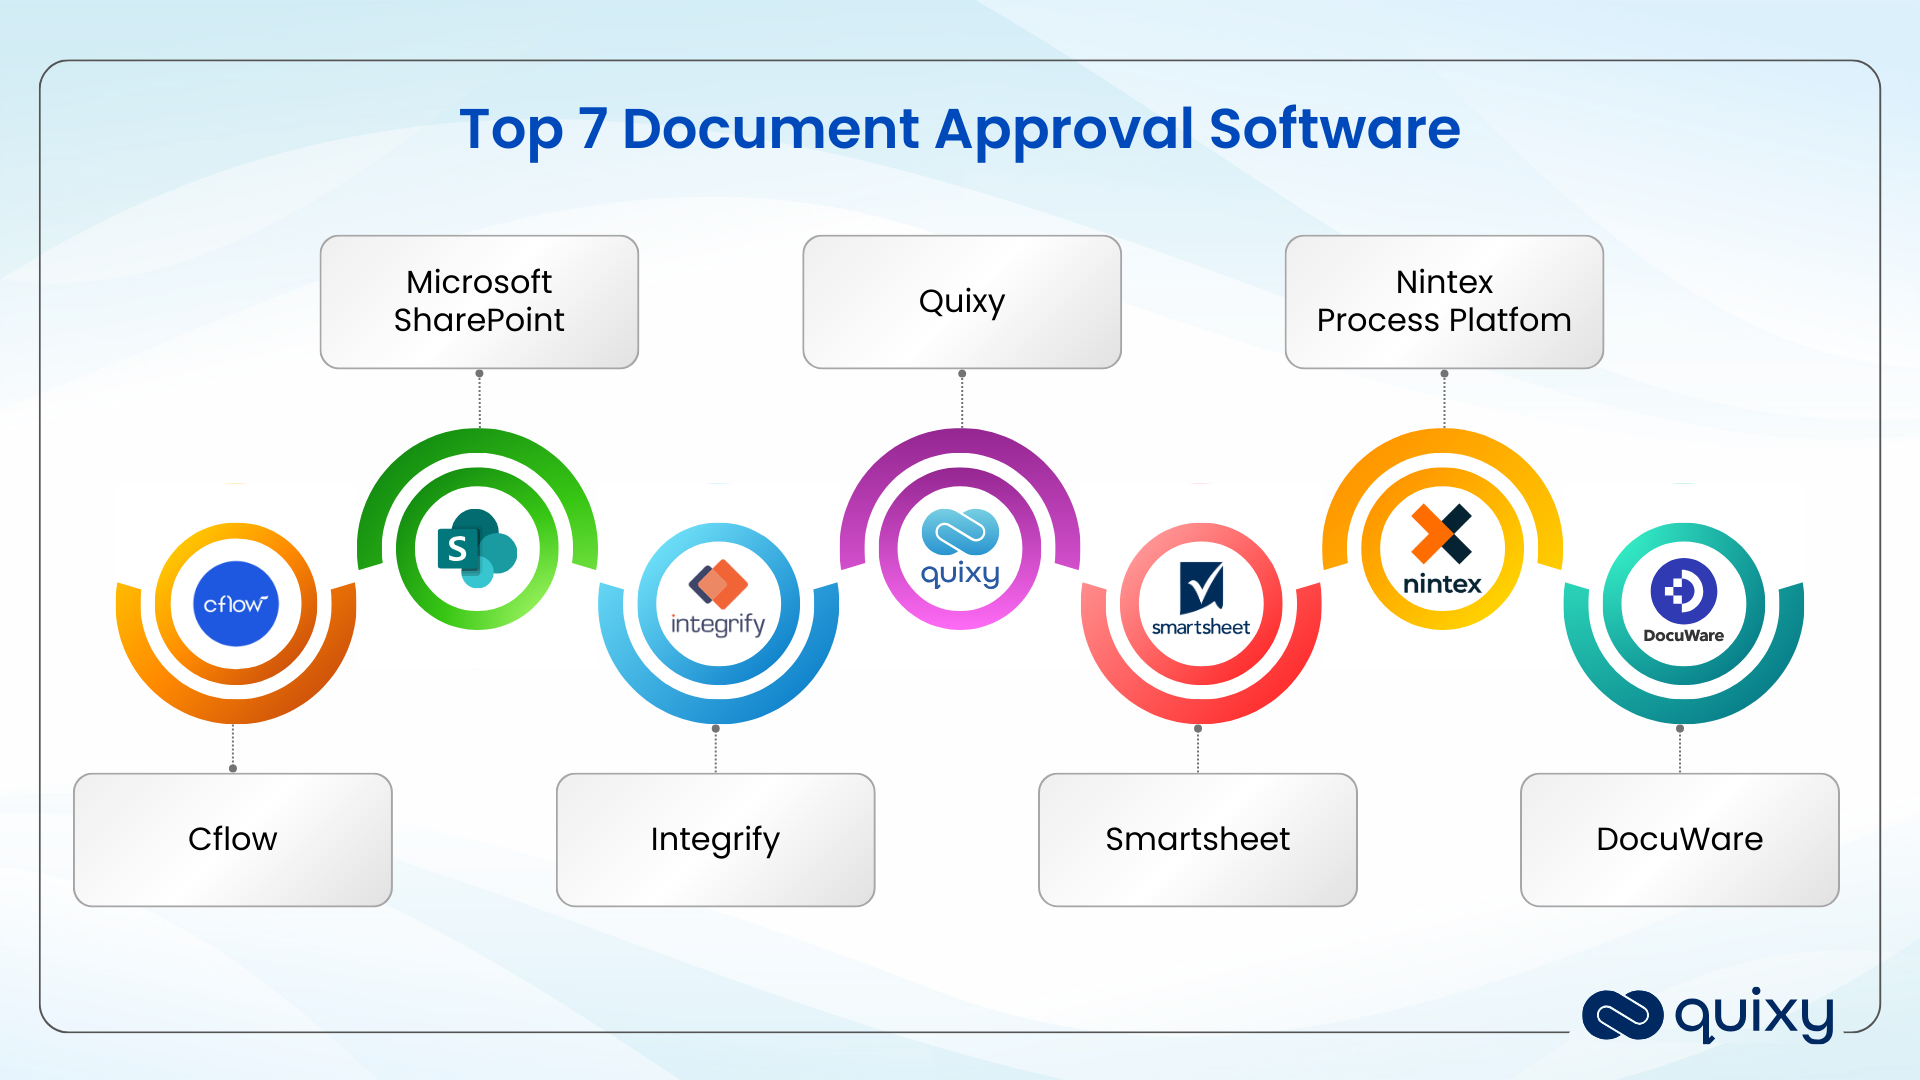 Top 7 Document Approval Software